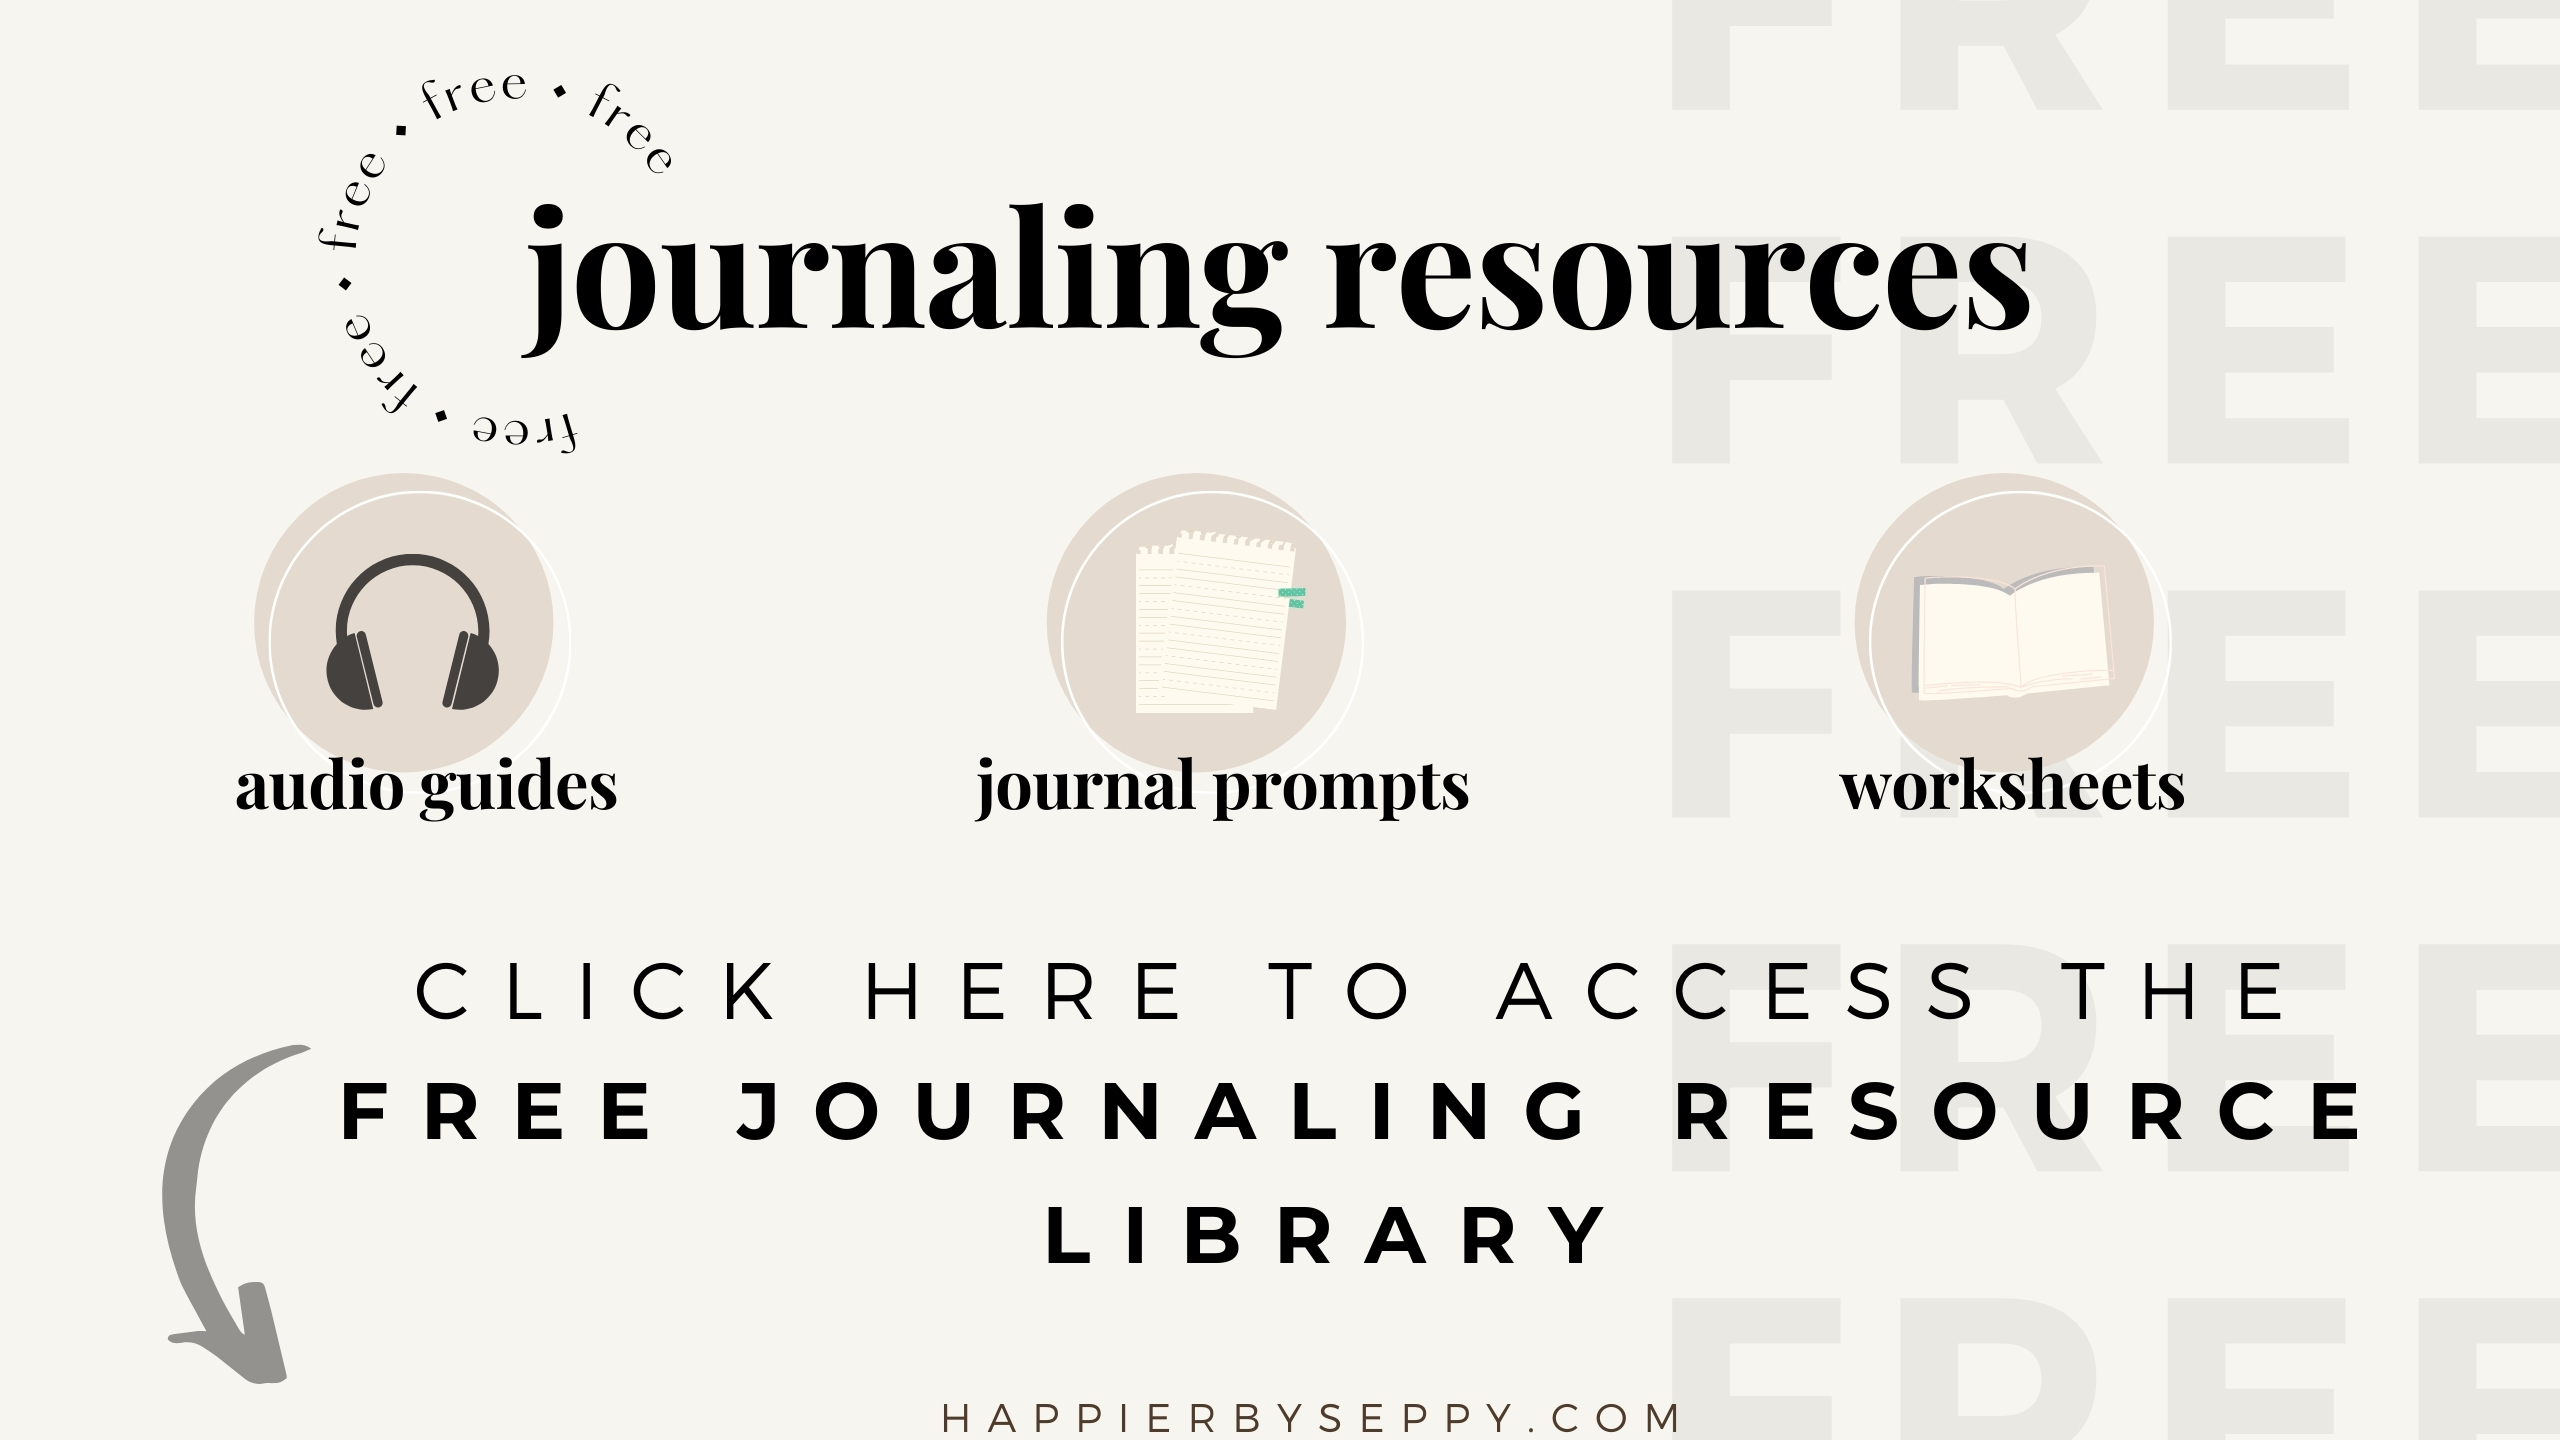 JOURNALING RESOURCES FOR BEGINNERS